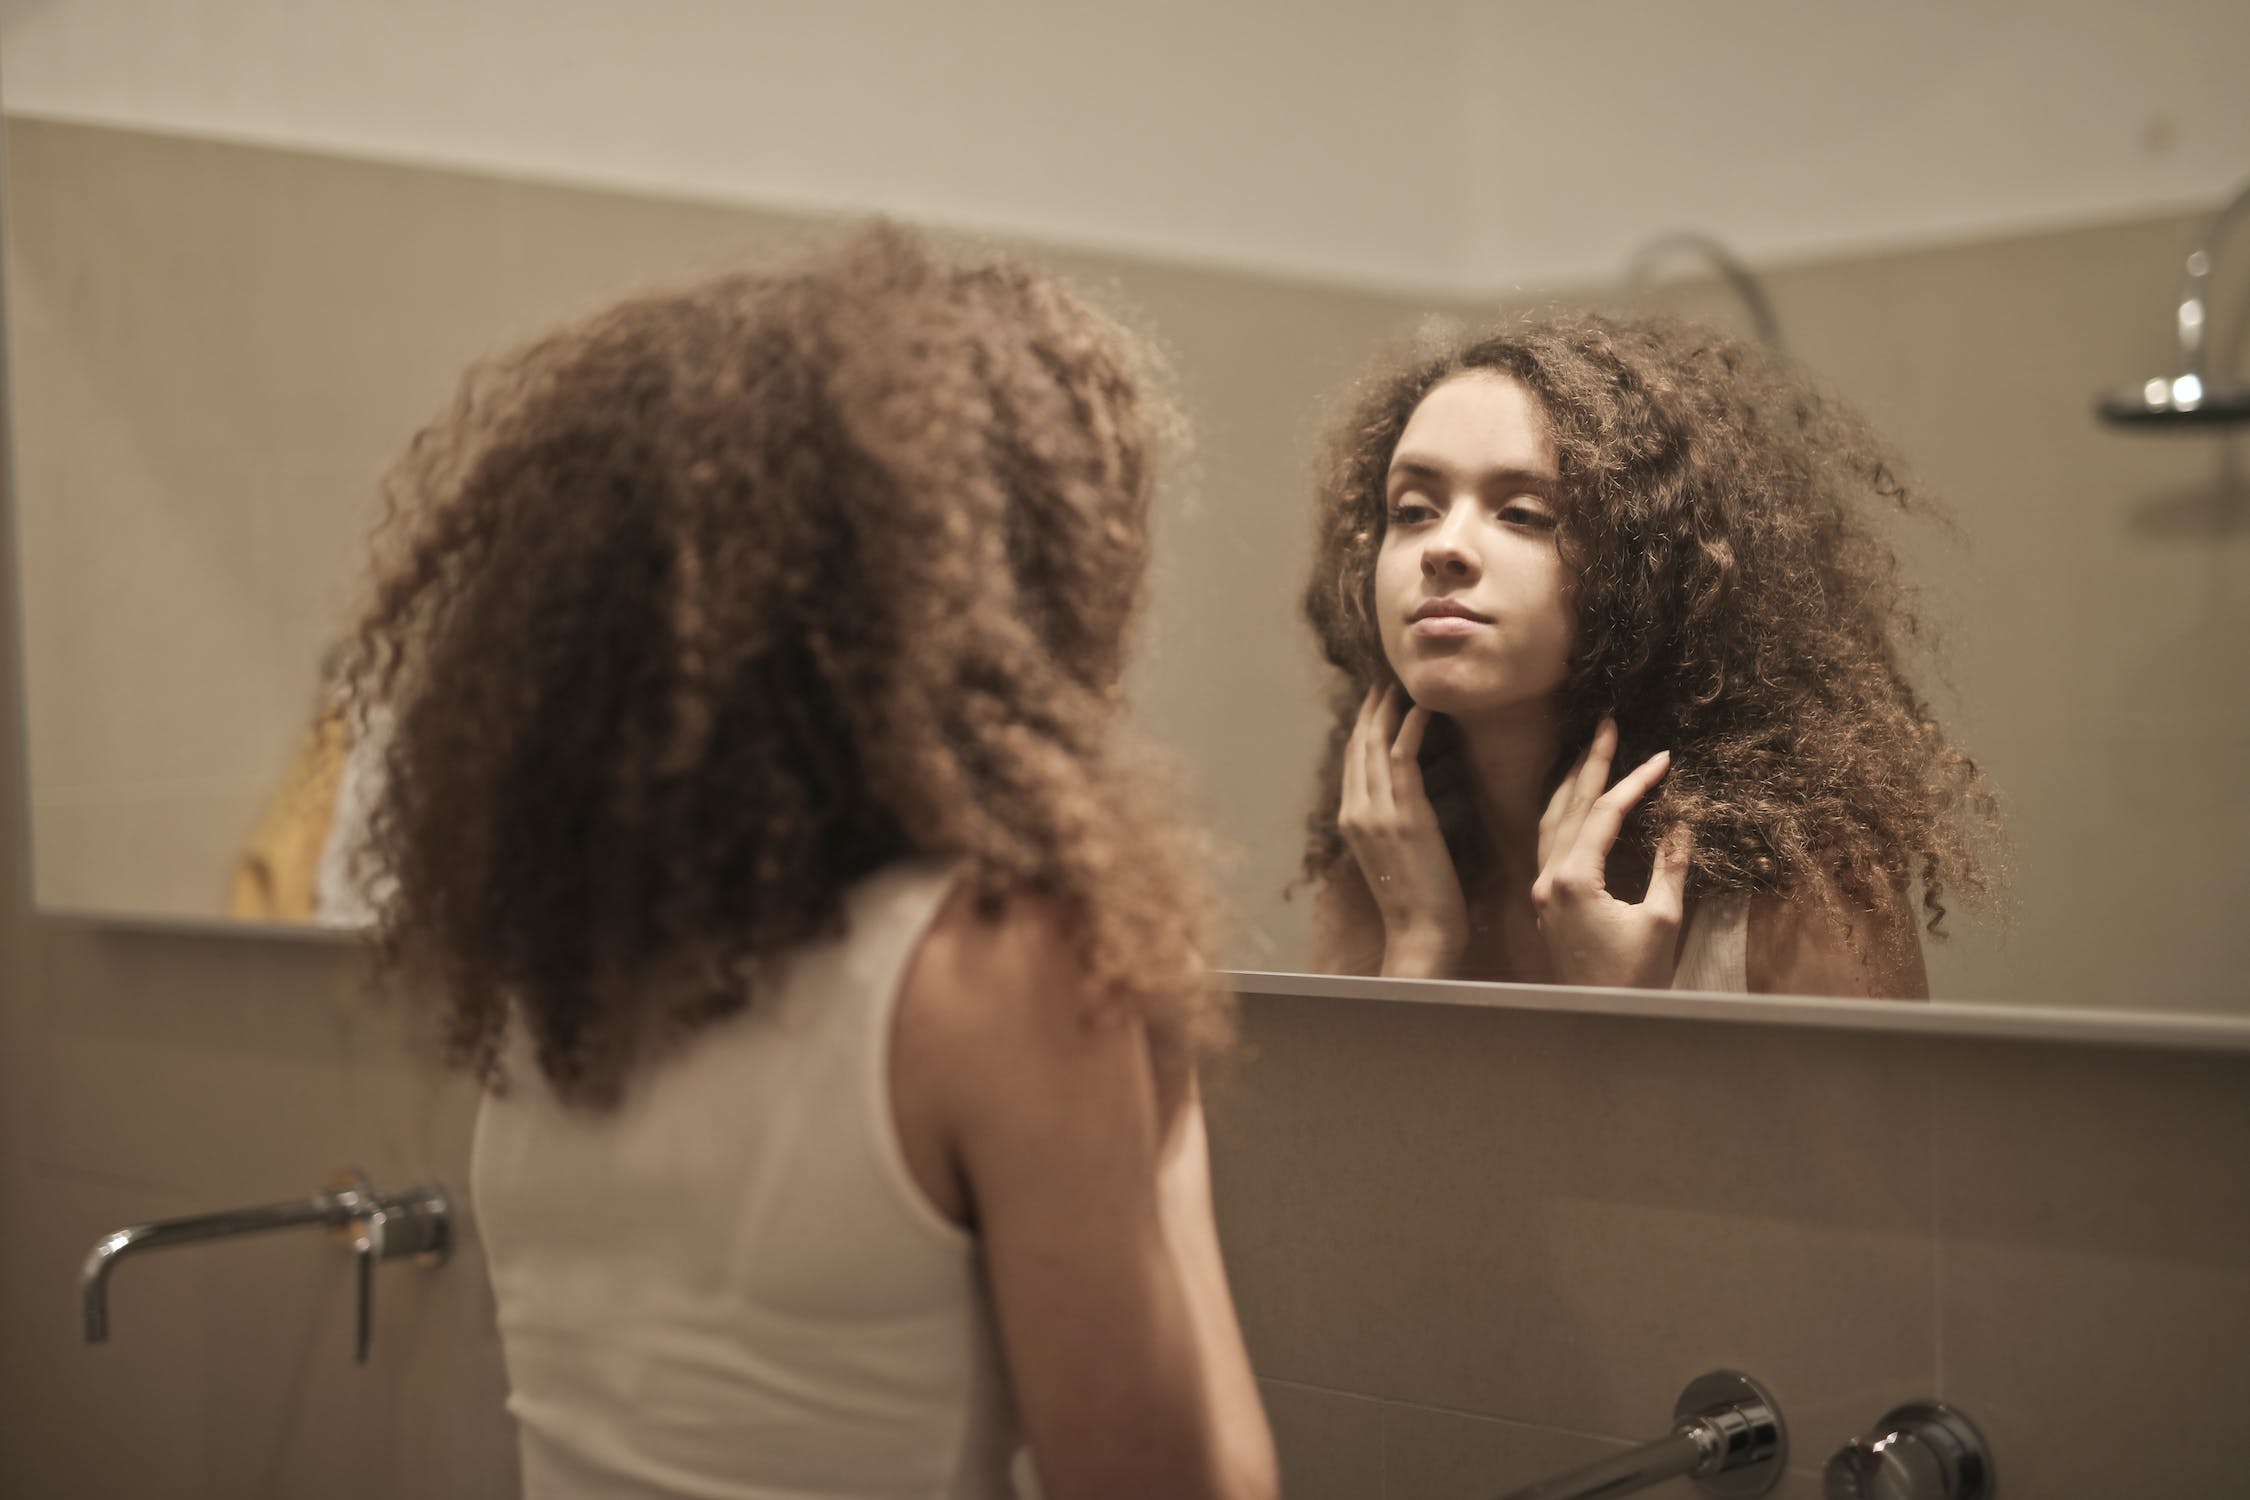 young-woman-with-thick-curly-brown-hair-looking-at-herself-in-bathroom-mirror-with-hands-by-her-face.